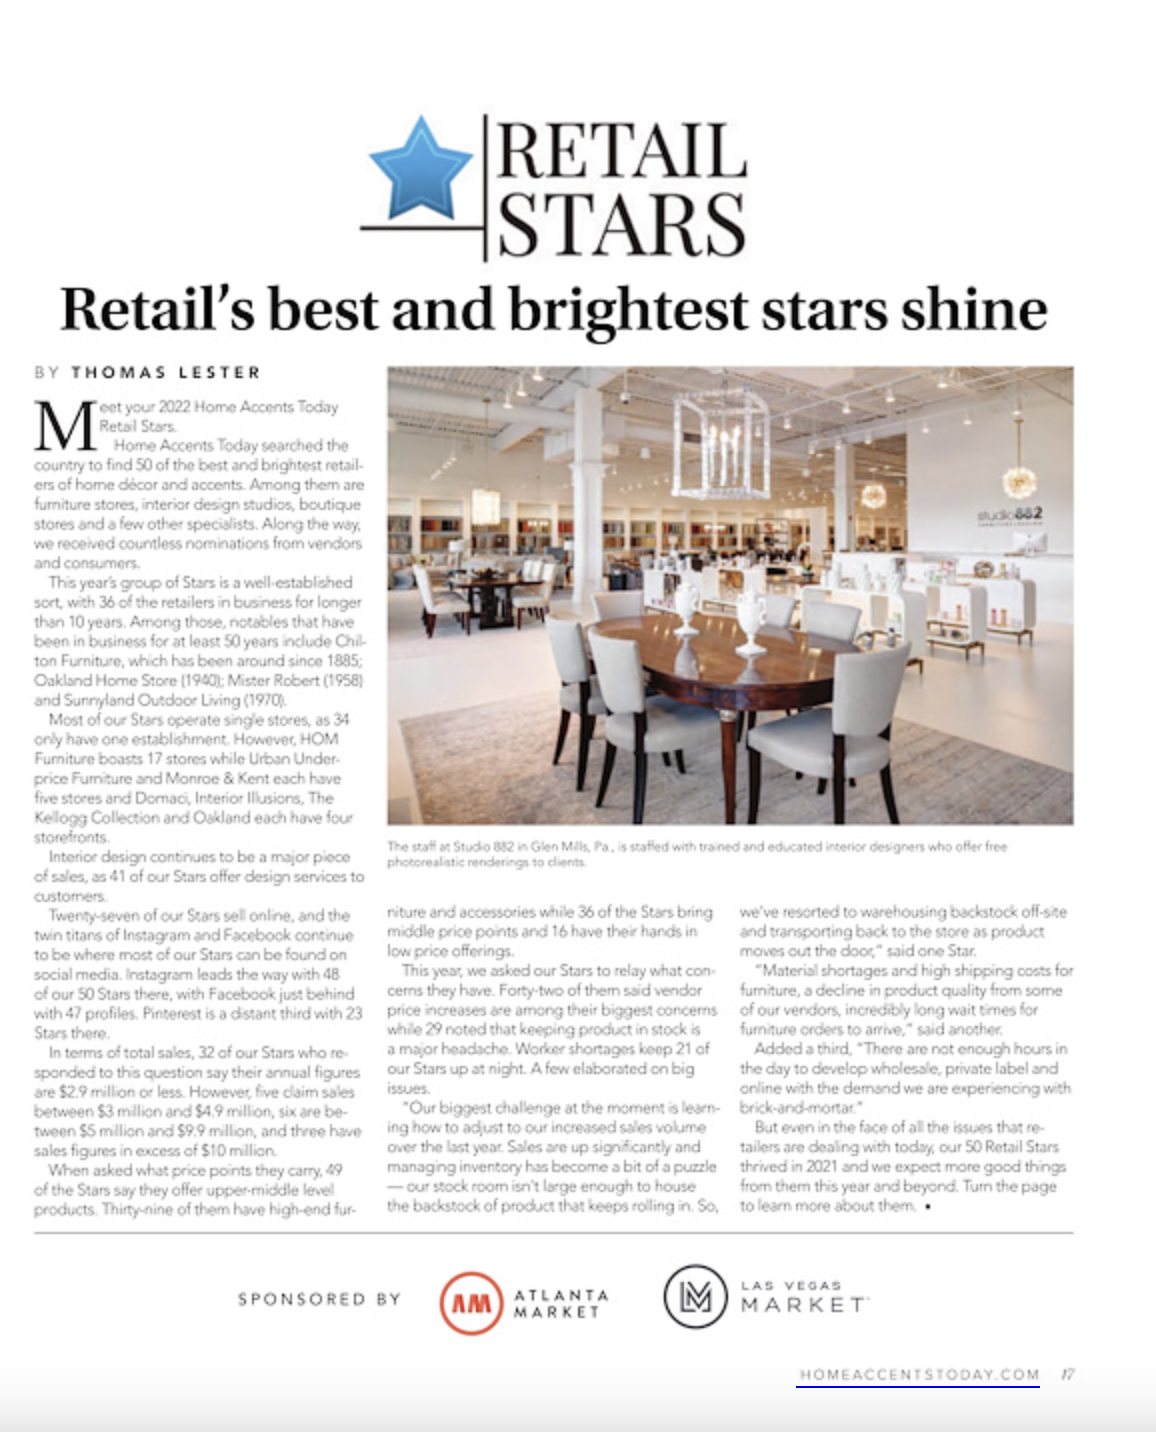 Home Accents Today: Retail Stars